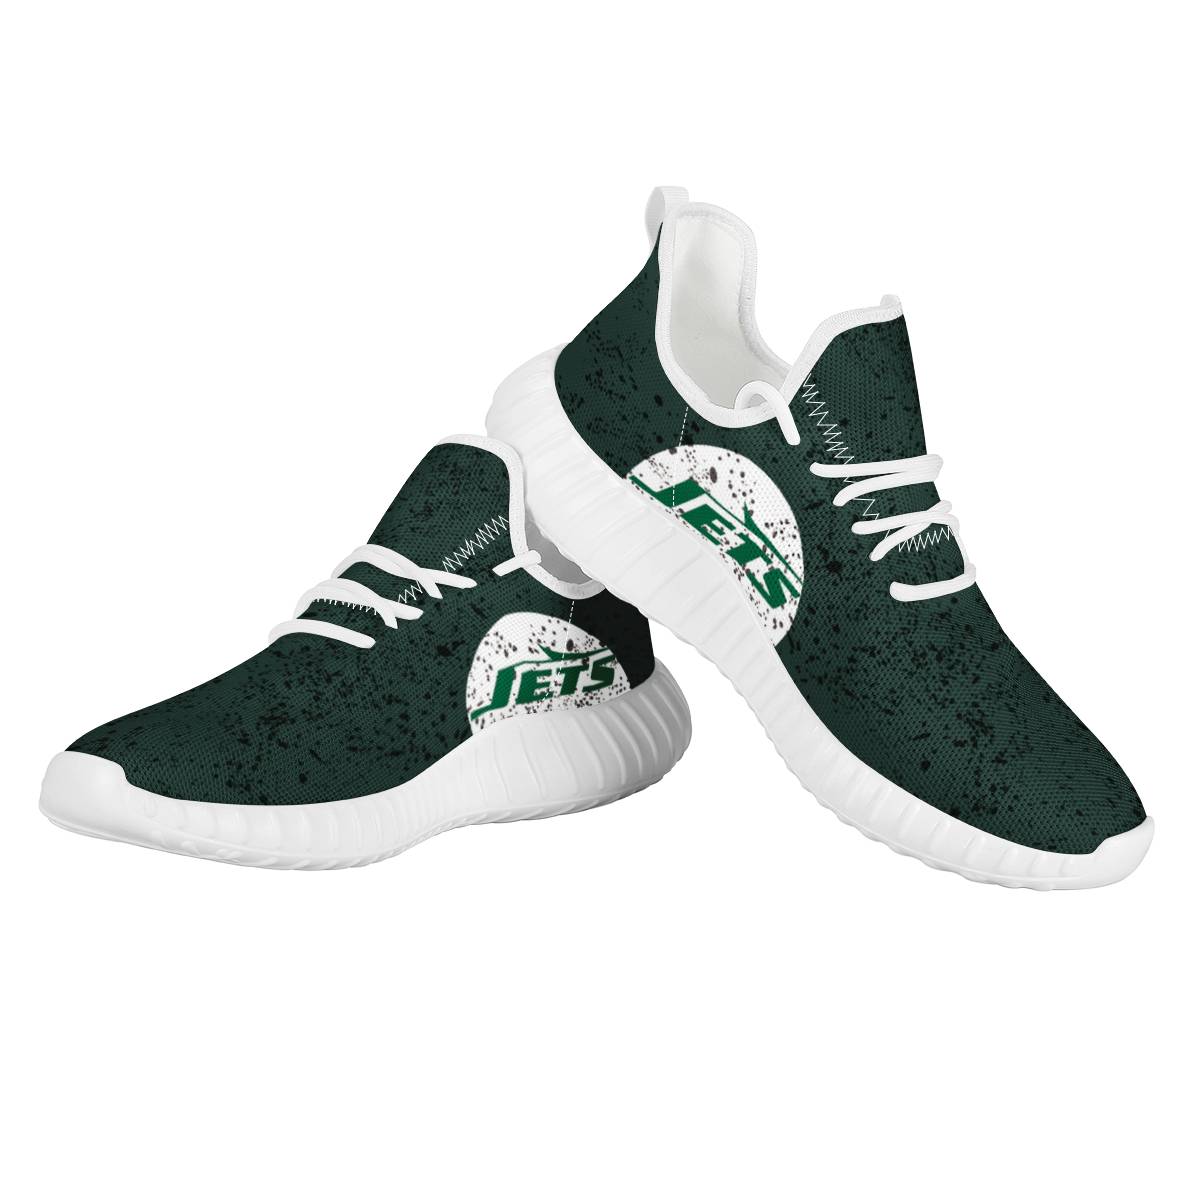 Men's New York Jets Mesh Knit Sneakers/Shoes 004